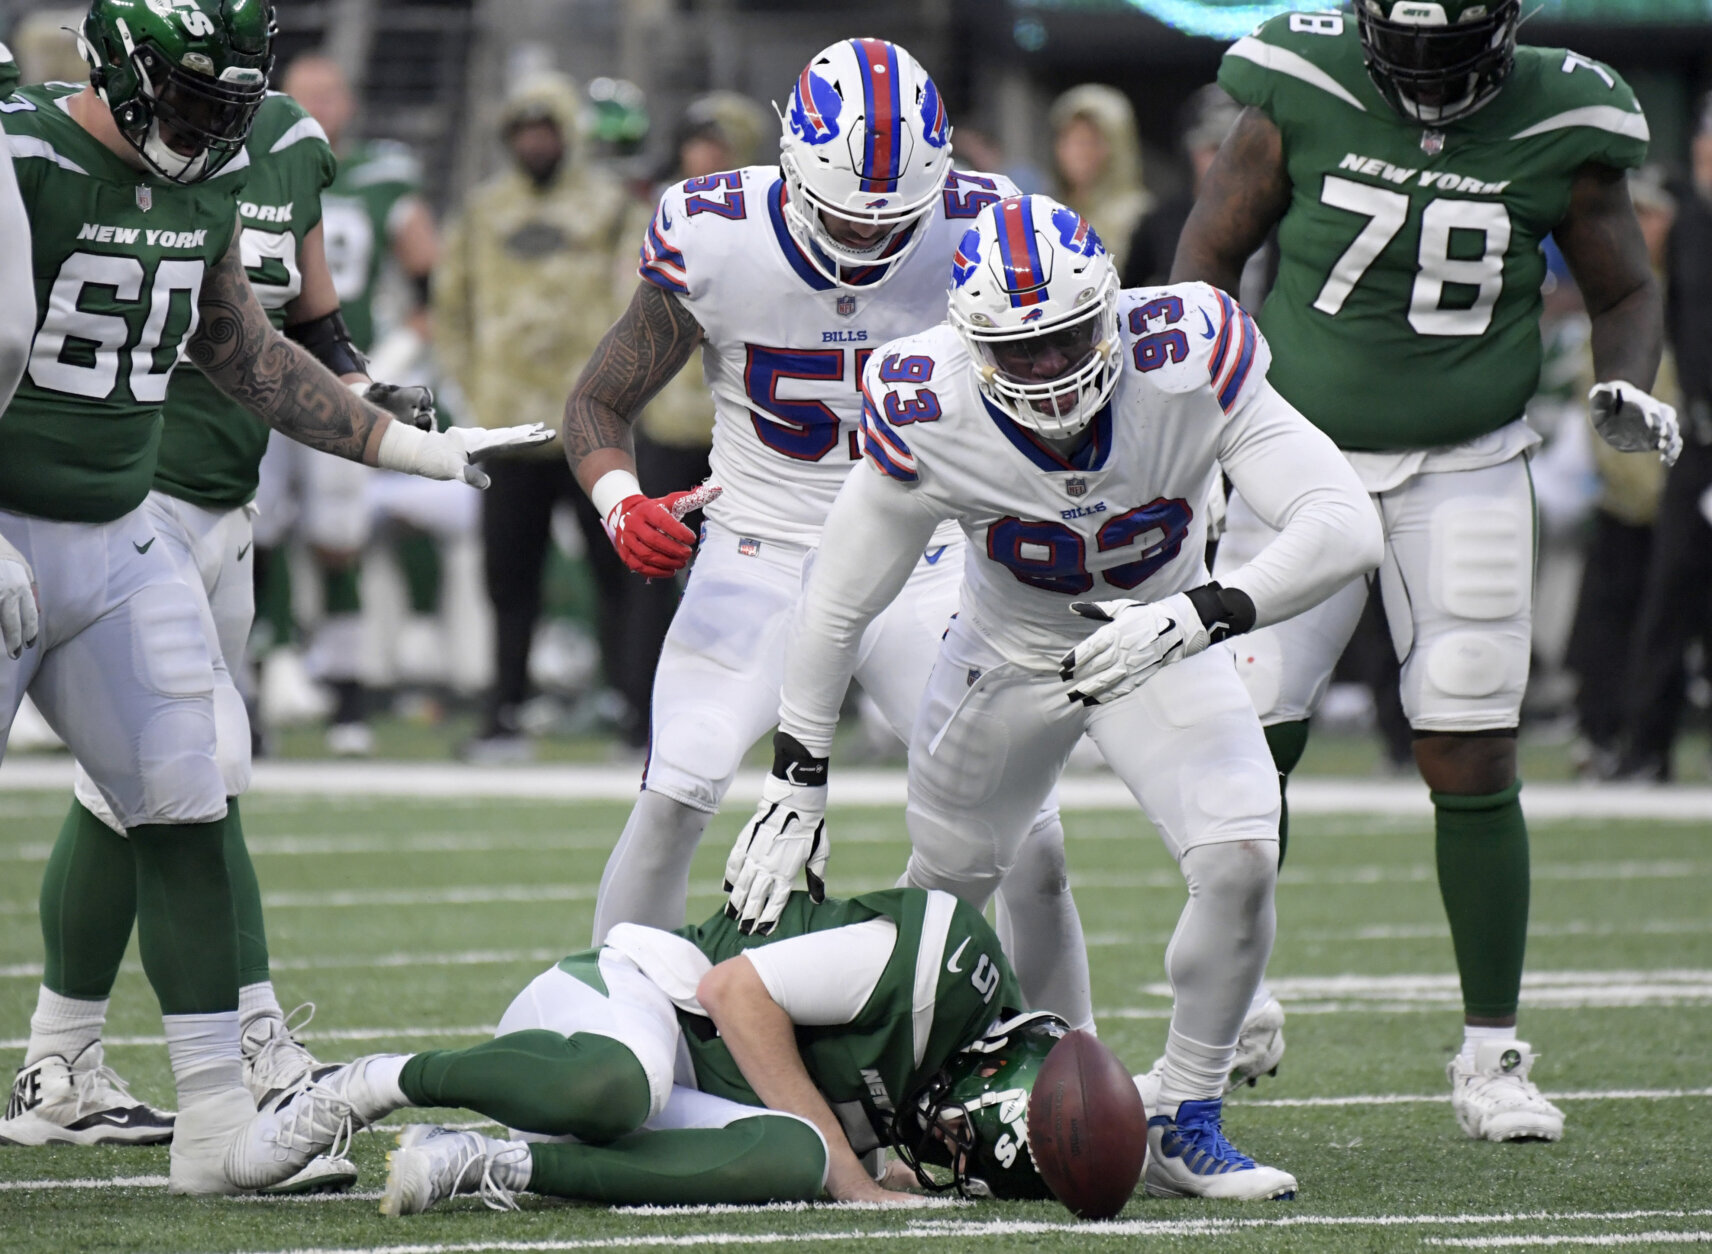 <p><b><i>Bills 45</i></b><br />
<b><i>Jets 17</i></b></p>
<p>Ok, y&#8217;all can kill all <a href="https://profootballtalk.nbcsports.com/2021/11/12/mike-white-if-you-ask-me-i-should-have-been-a-first-overall-pick/" target="_blank" rel="noopener">this Mike white noise</a>. Buffalo is who we thought they were and white is who we thought he was. Zach Wilson is the leader of this team, for better or worse — and if <a href="https://profootballtalk.nbcsports.com/2021/11/12/zach-wilson-on-mike-white-my-style-of-play-needs-to-be-more-like-his/" target="_blank" rel="noopener">he&#8217;s trying to play like white</a>, the Jets are in a whole new world of trouble.</p>
